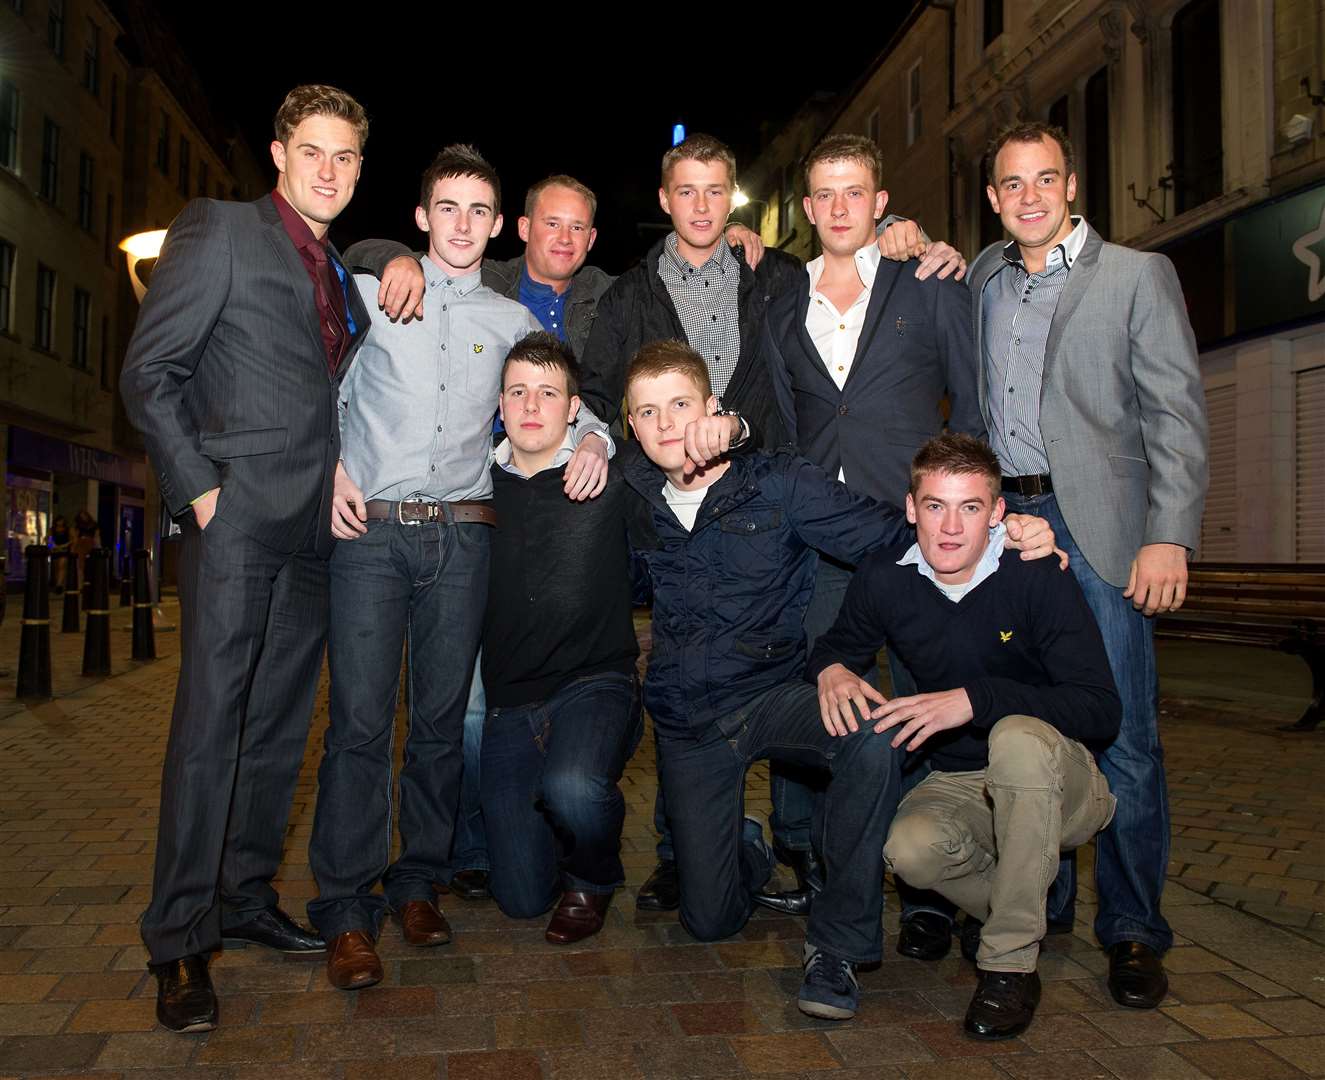 Lads night out for Nathan Dalgetty's (third left, kneeling) birthday.